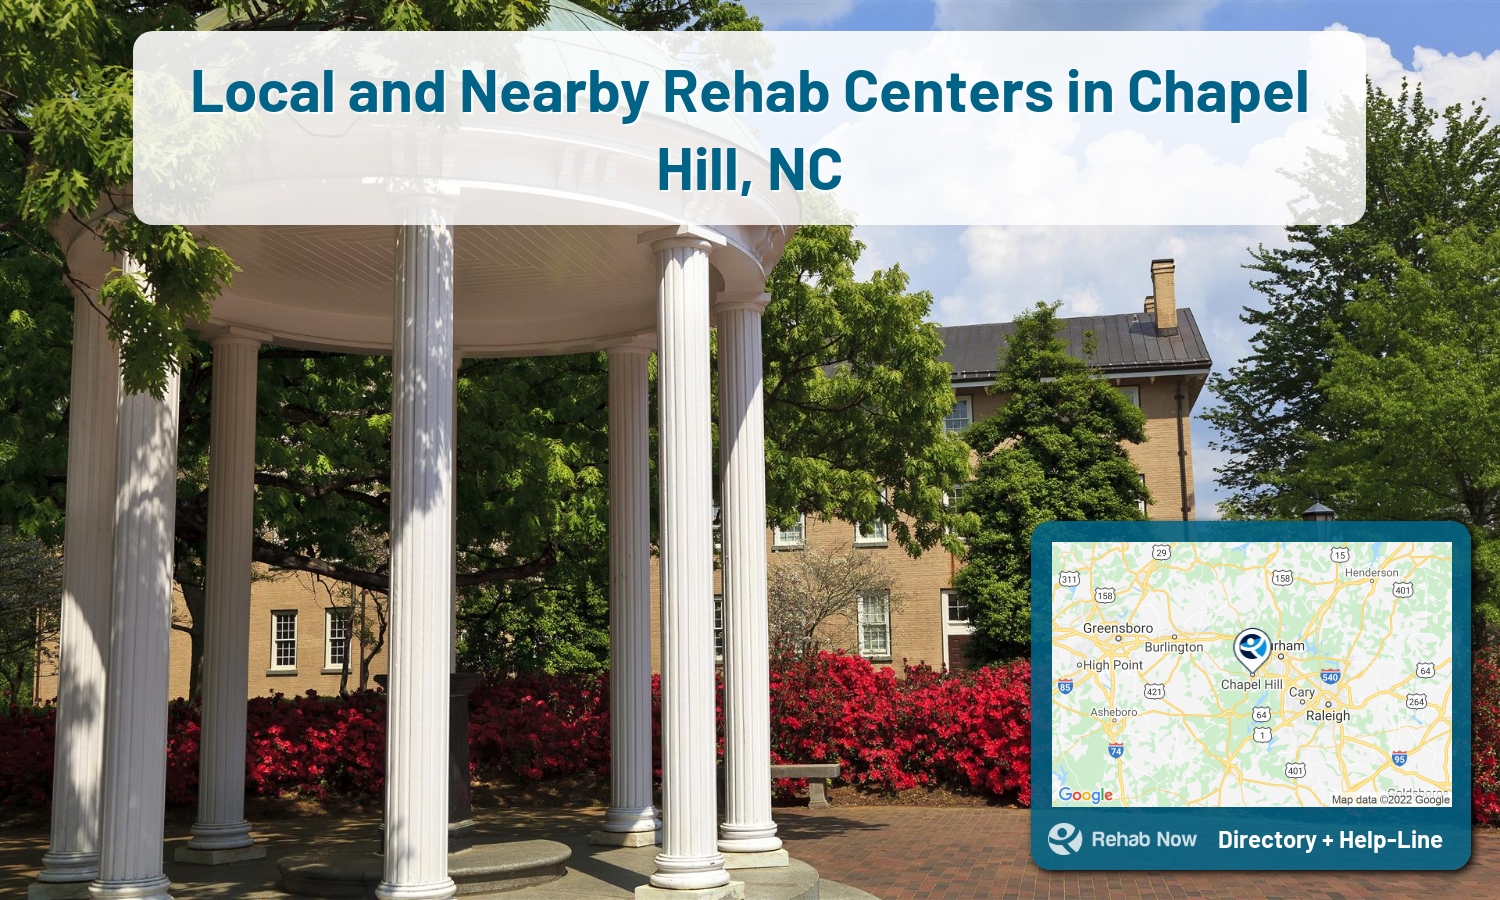 View options, availability, treatment methods, and more, for drug rehab and alcohol treatment in Chapel Hill, North Carolina